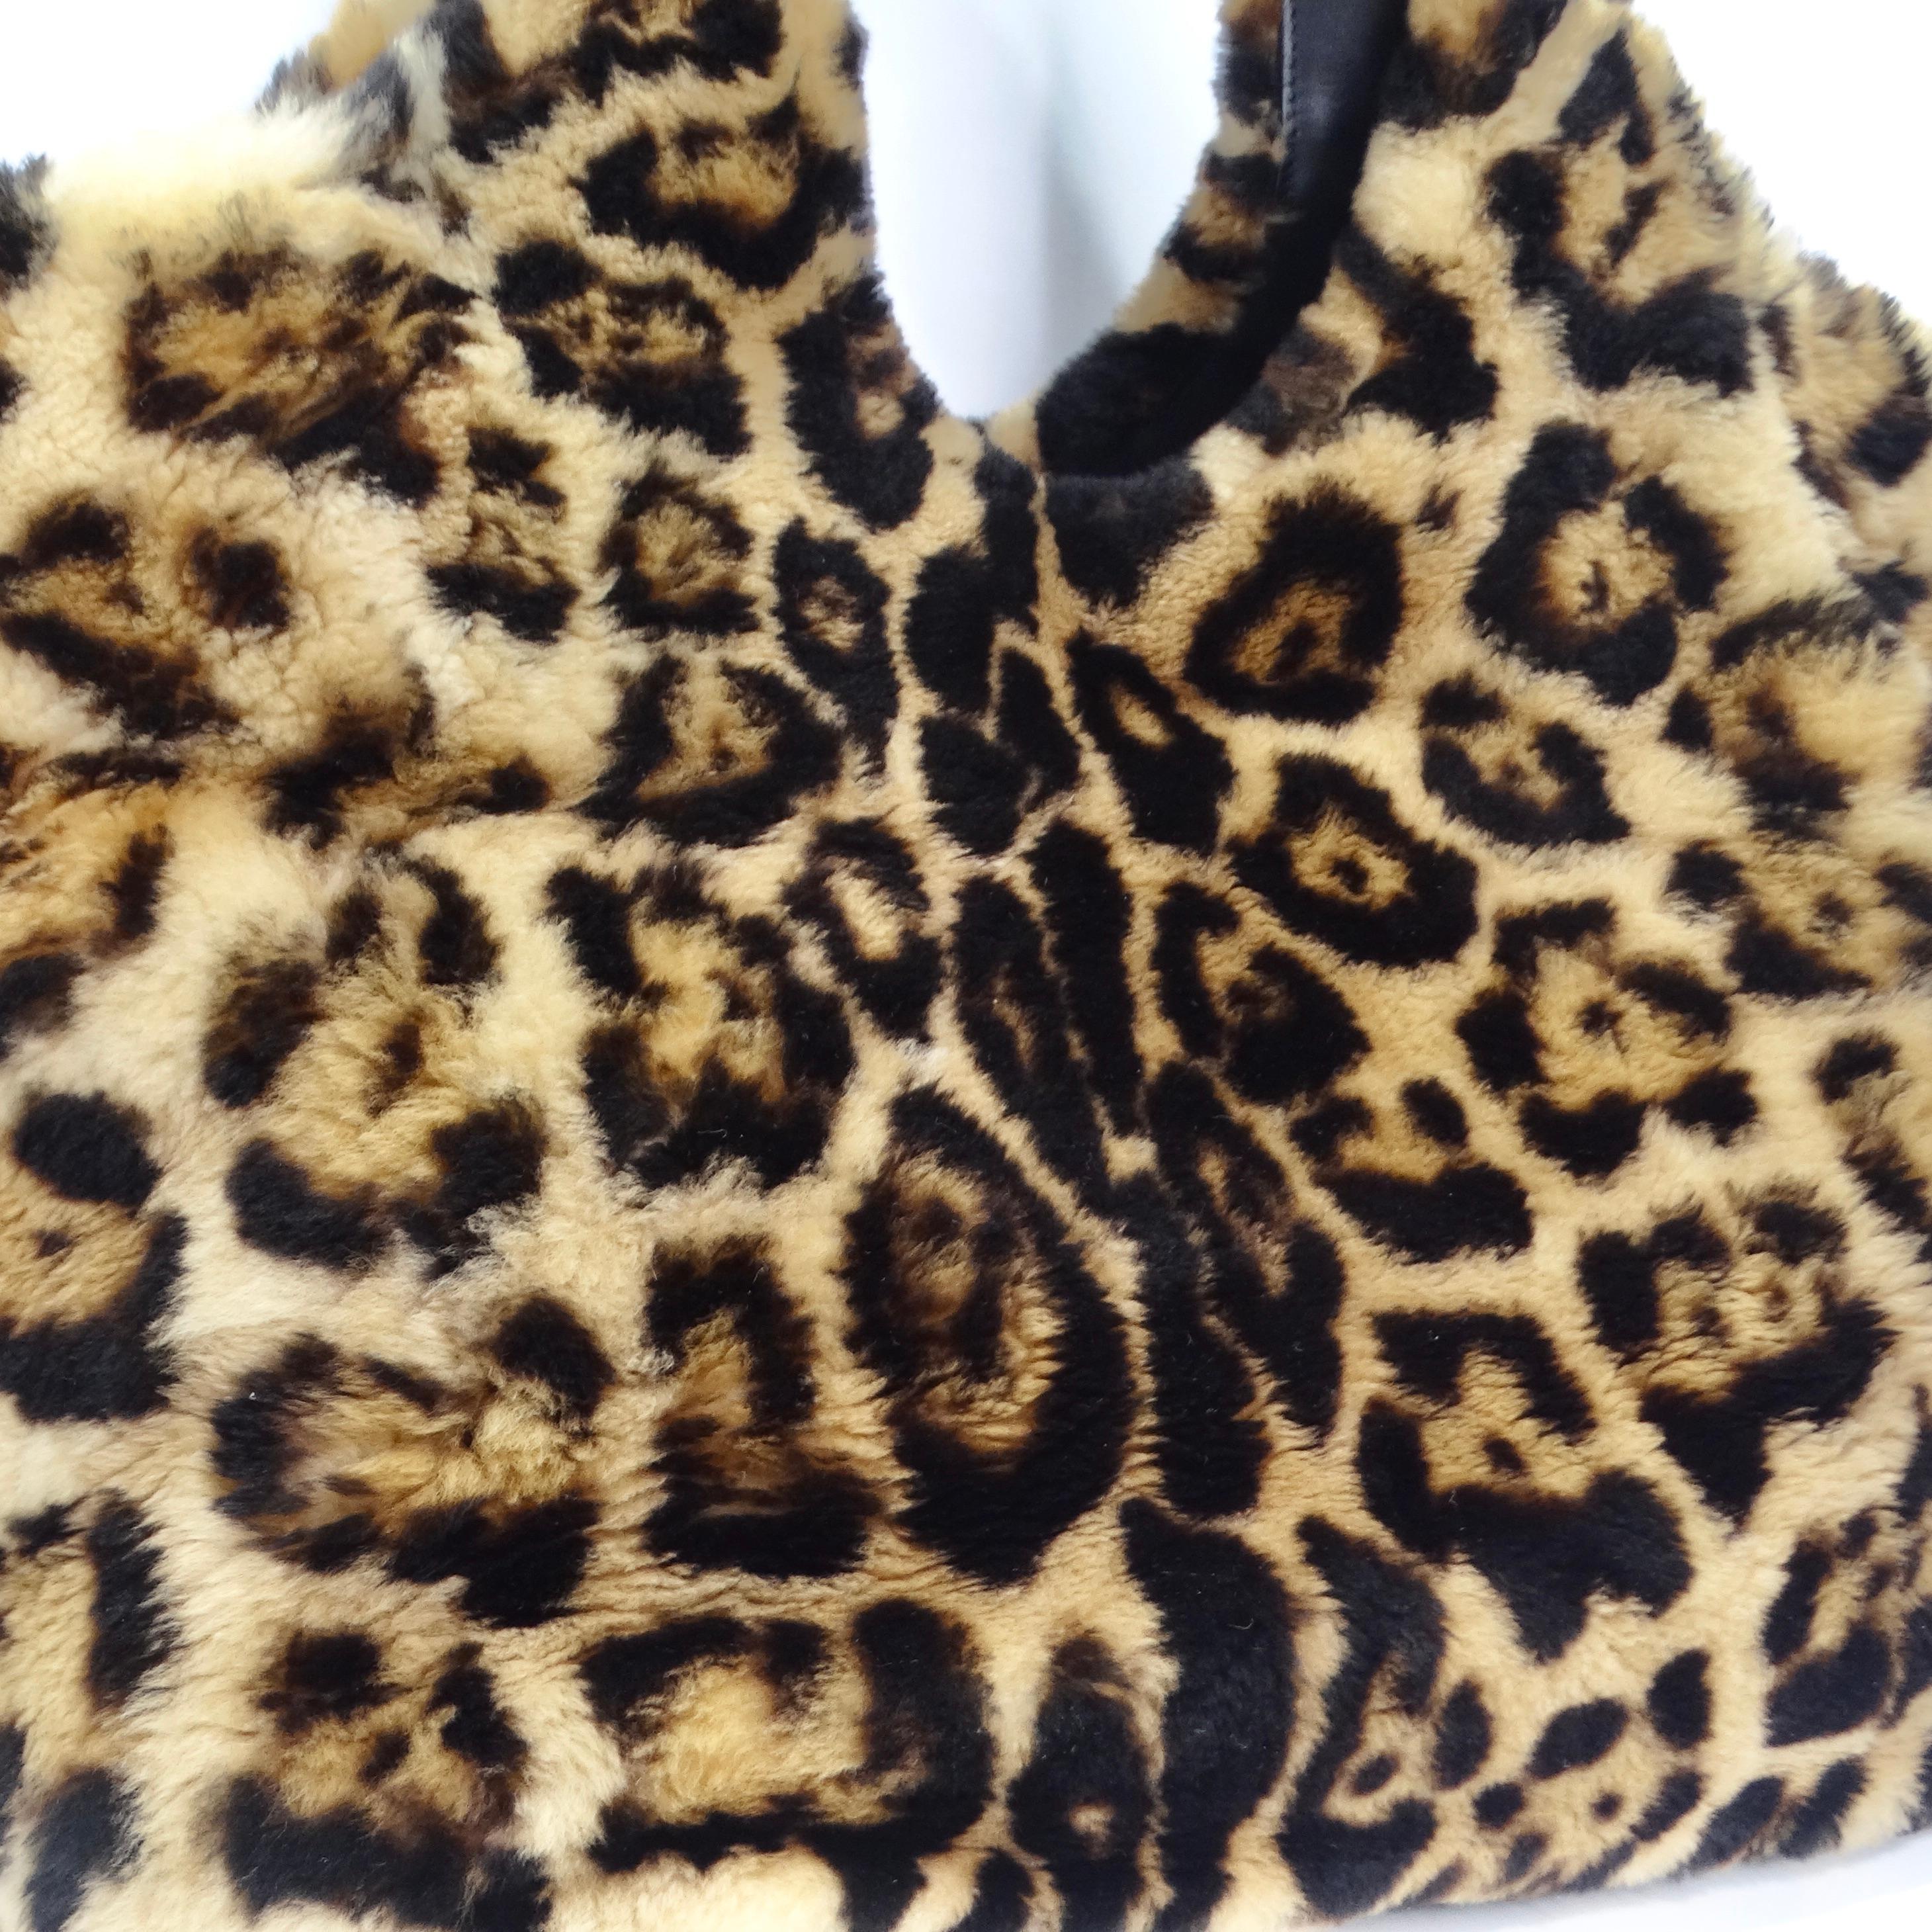 Indulge in the world of high fashion with the Tom Ford Rare Leopard Print Fur Handbag – a truly exceptional tote bag that's as luxurious as it is striking. Make a bold statement with this exceptionally rare tote bag, featuring a daring leopard dyed